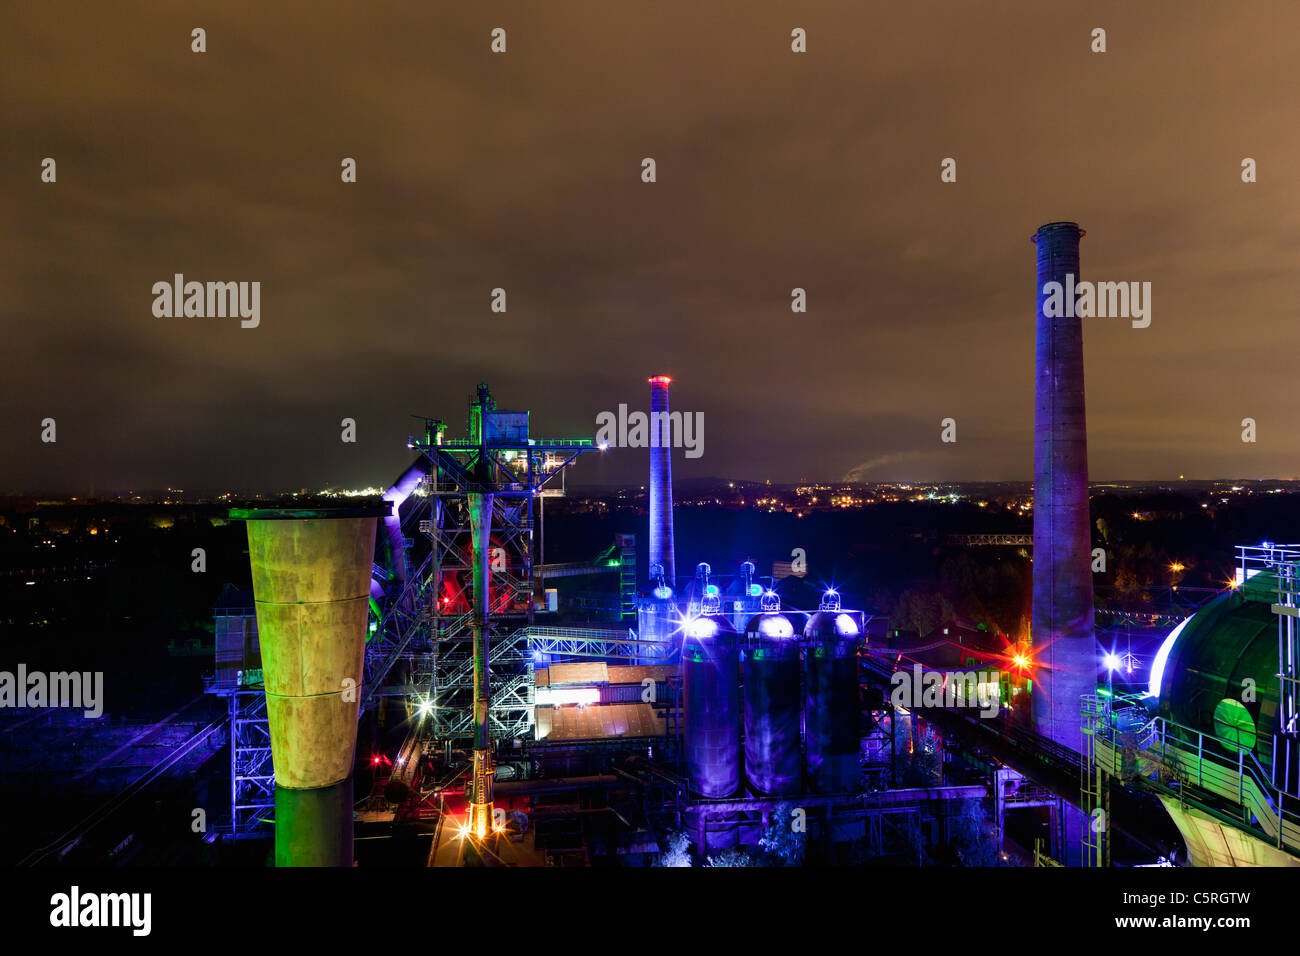 Germany  Illuminated blast furnace and smoke stacks of old industrial plant Stock Photo